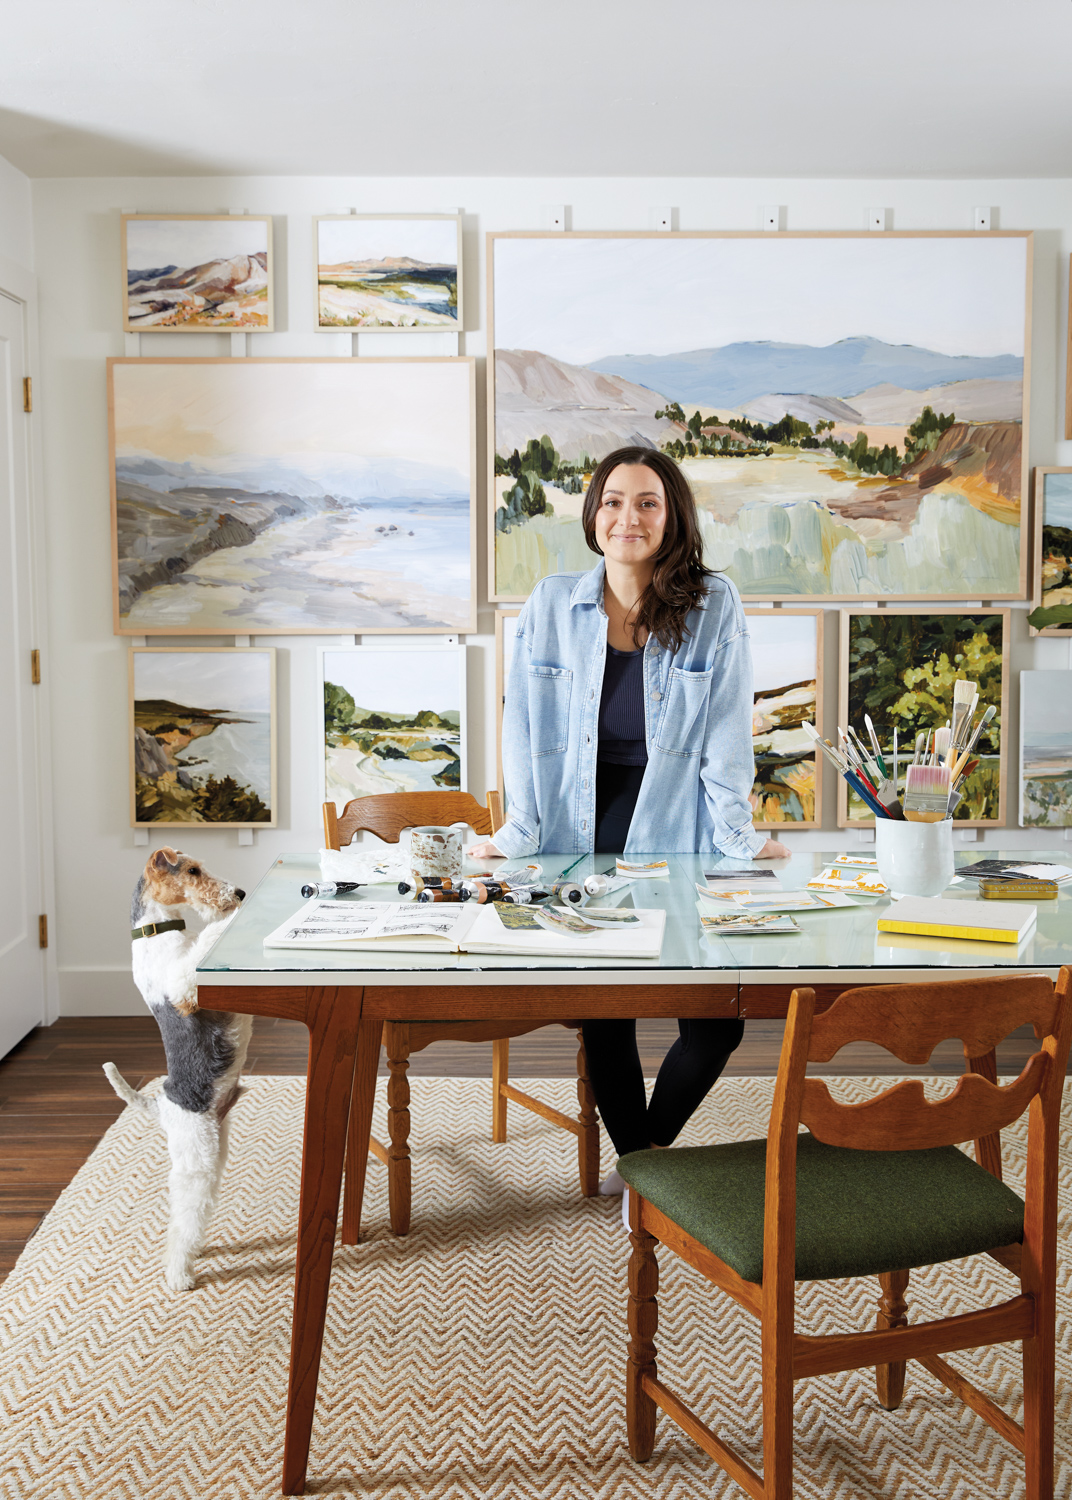 a woman in a blue shirt stands at an art table with landscape paintings behind her and a dog next to her